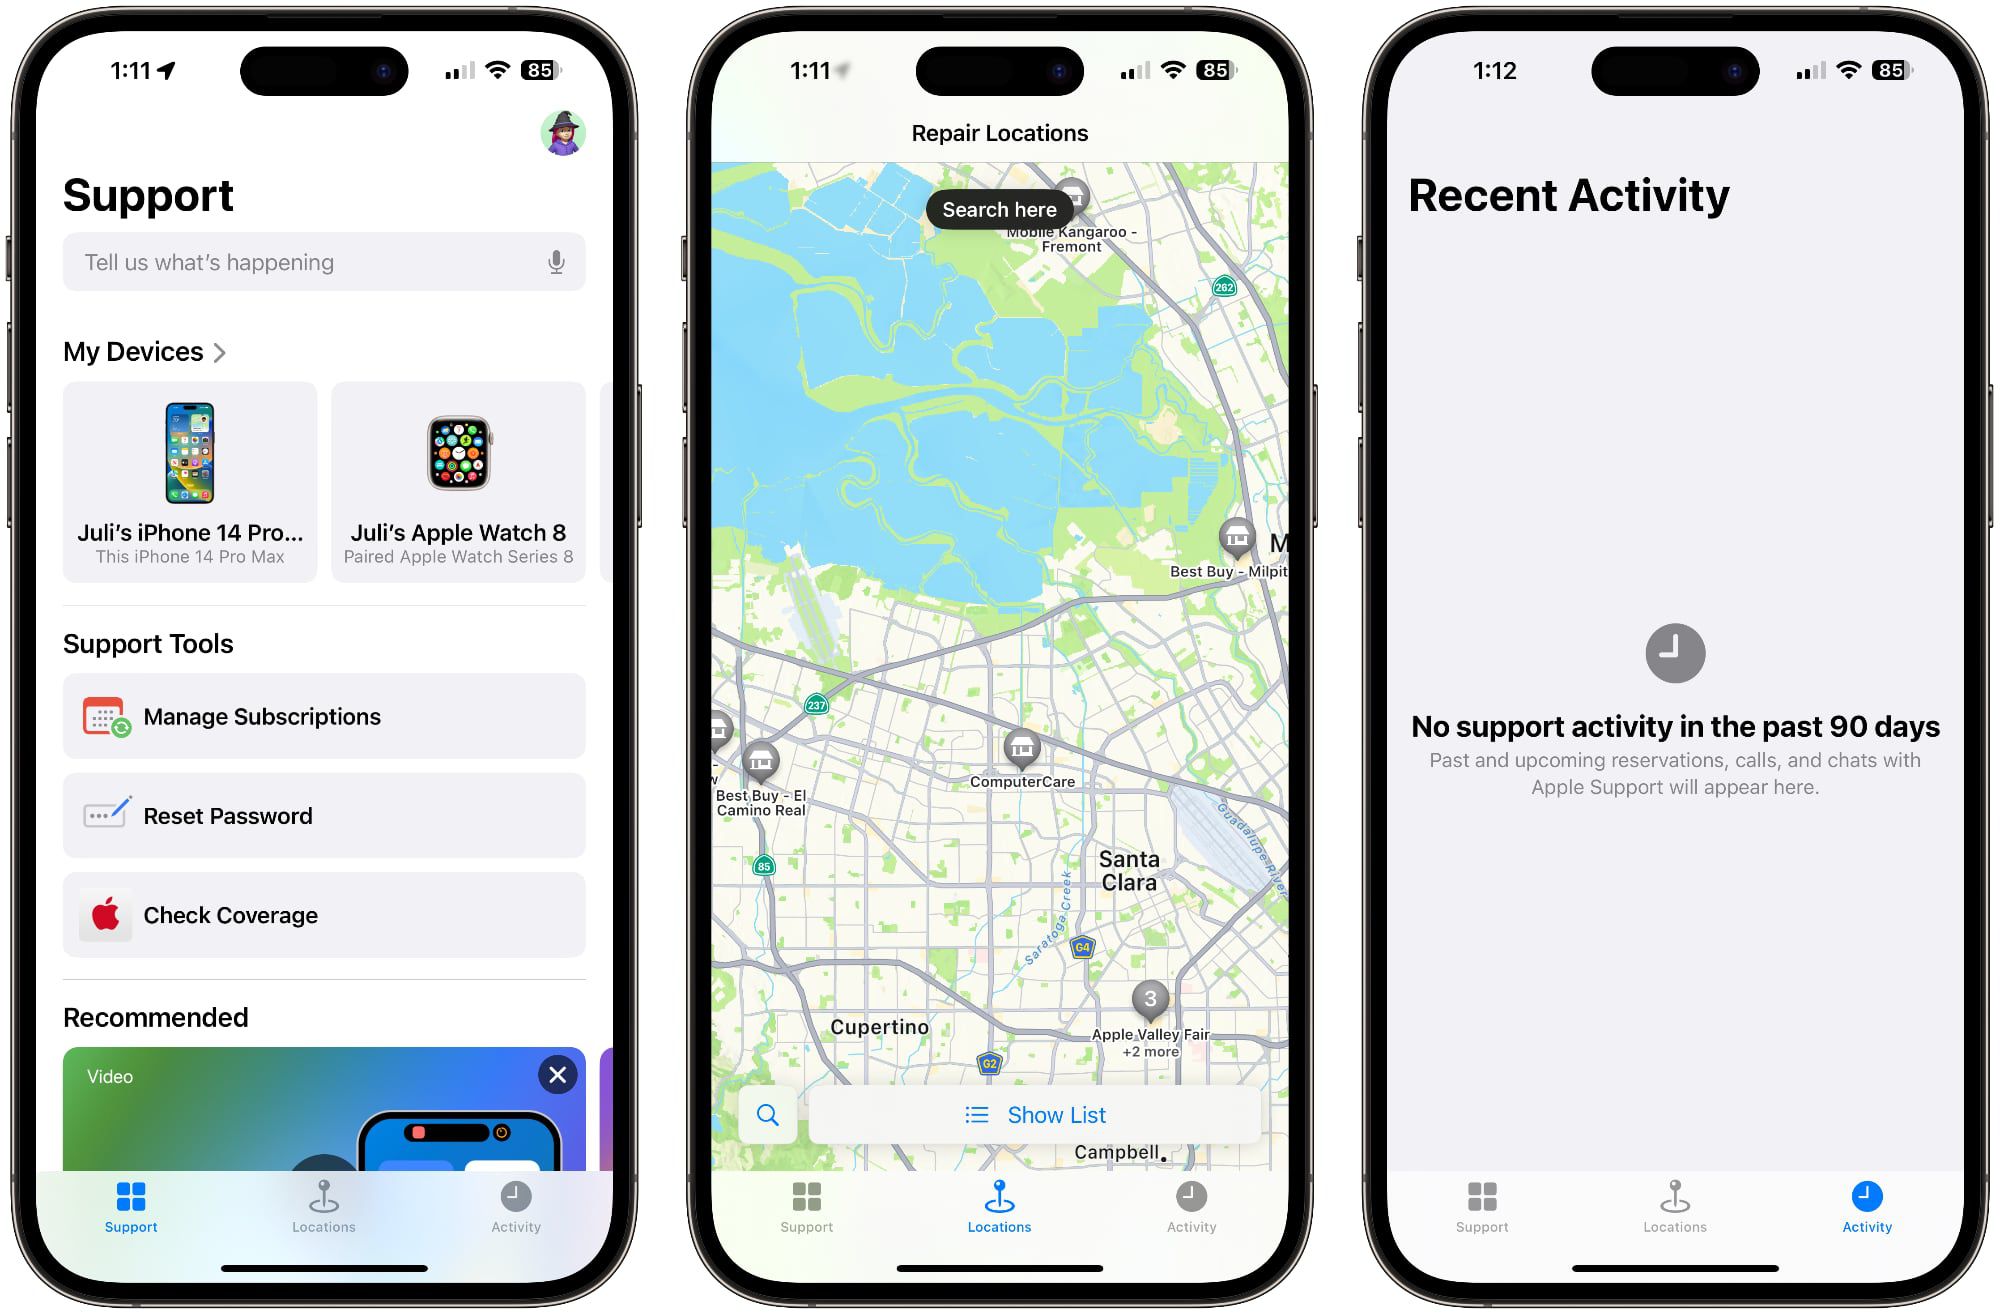 Apple Overhauls Support App With Updated Layout and Easier Access to Local Providers - macrumors.com